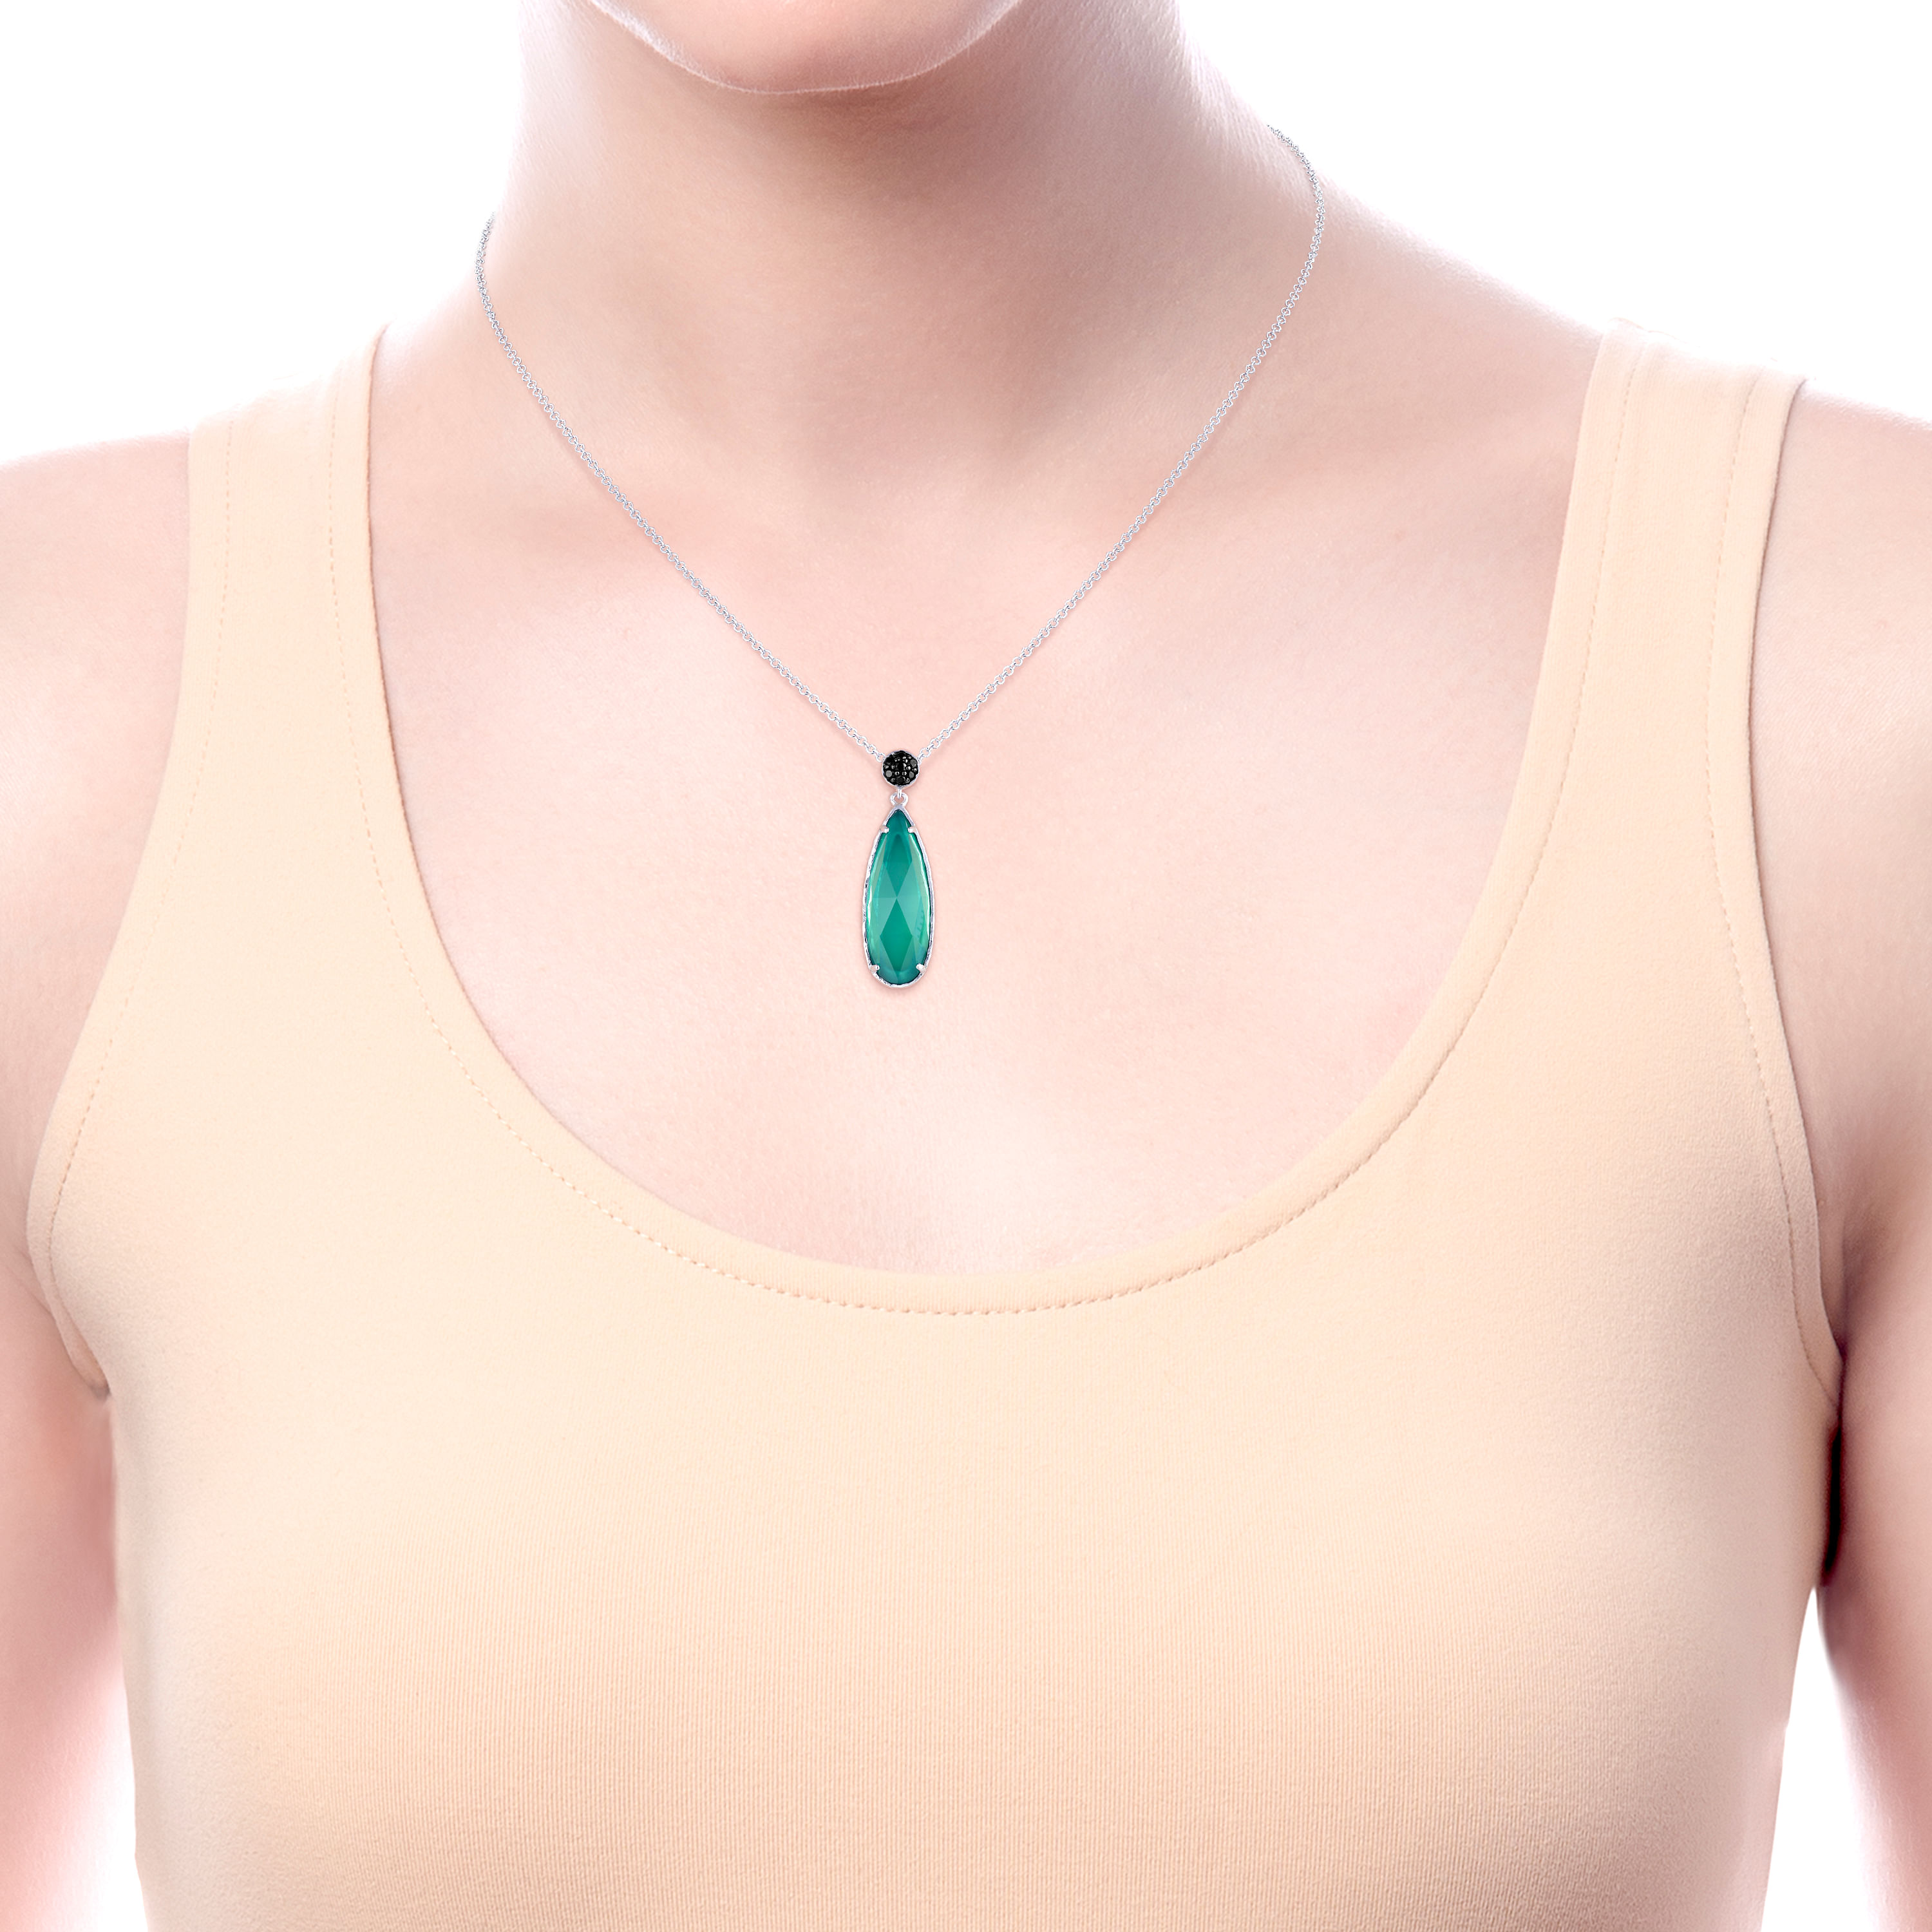 Sterling Silver Rock Crystal/Green Onyx Teardrop Pendant Necklace with Black Spinel